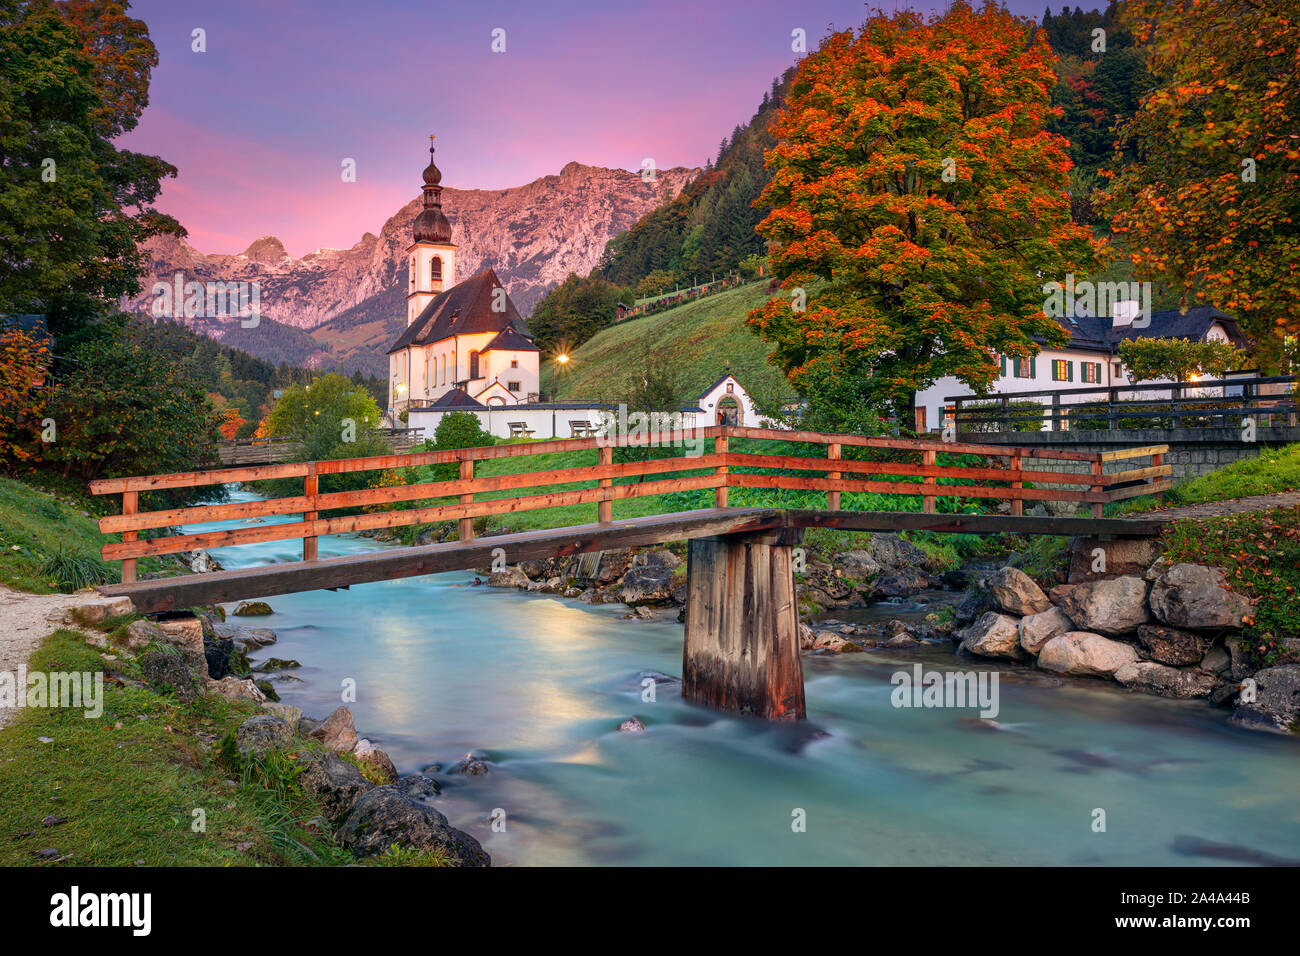 Autumn in Alps. Image of the Bavarian Alps with Parish Church of St. Sebastian located in Ramsau bei Berchestgaden, Germany during beautiful autumn su Stock Photo